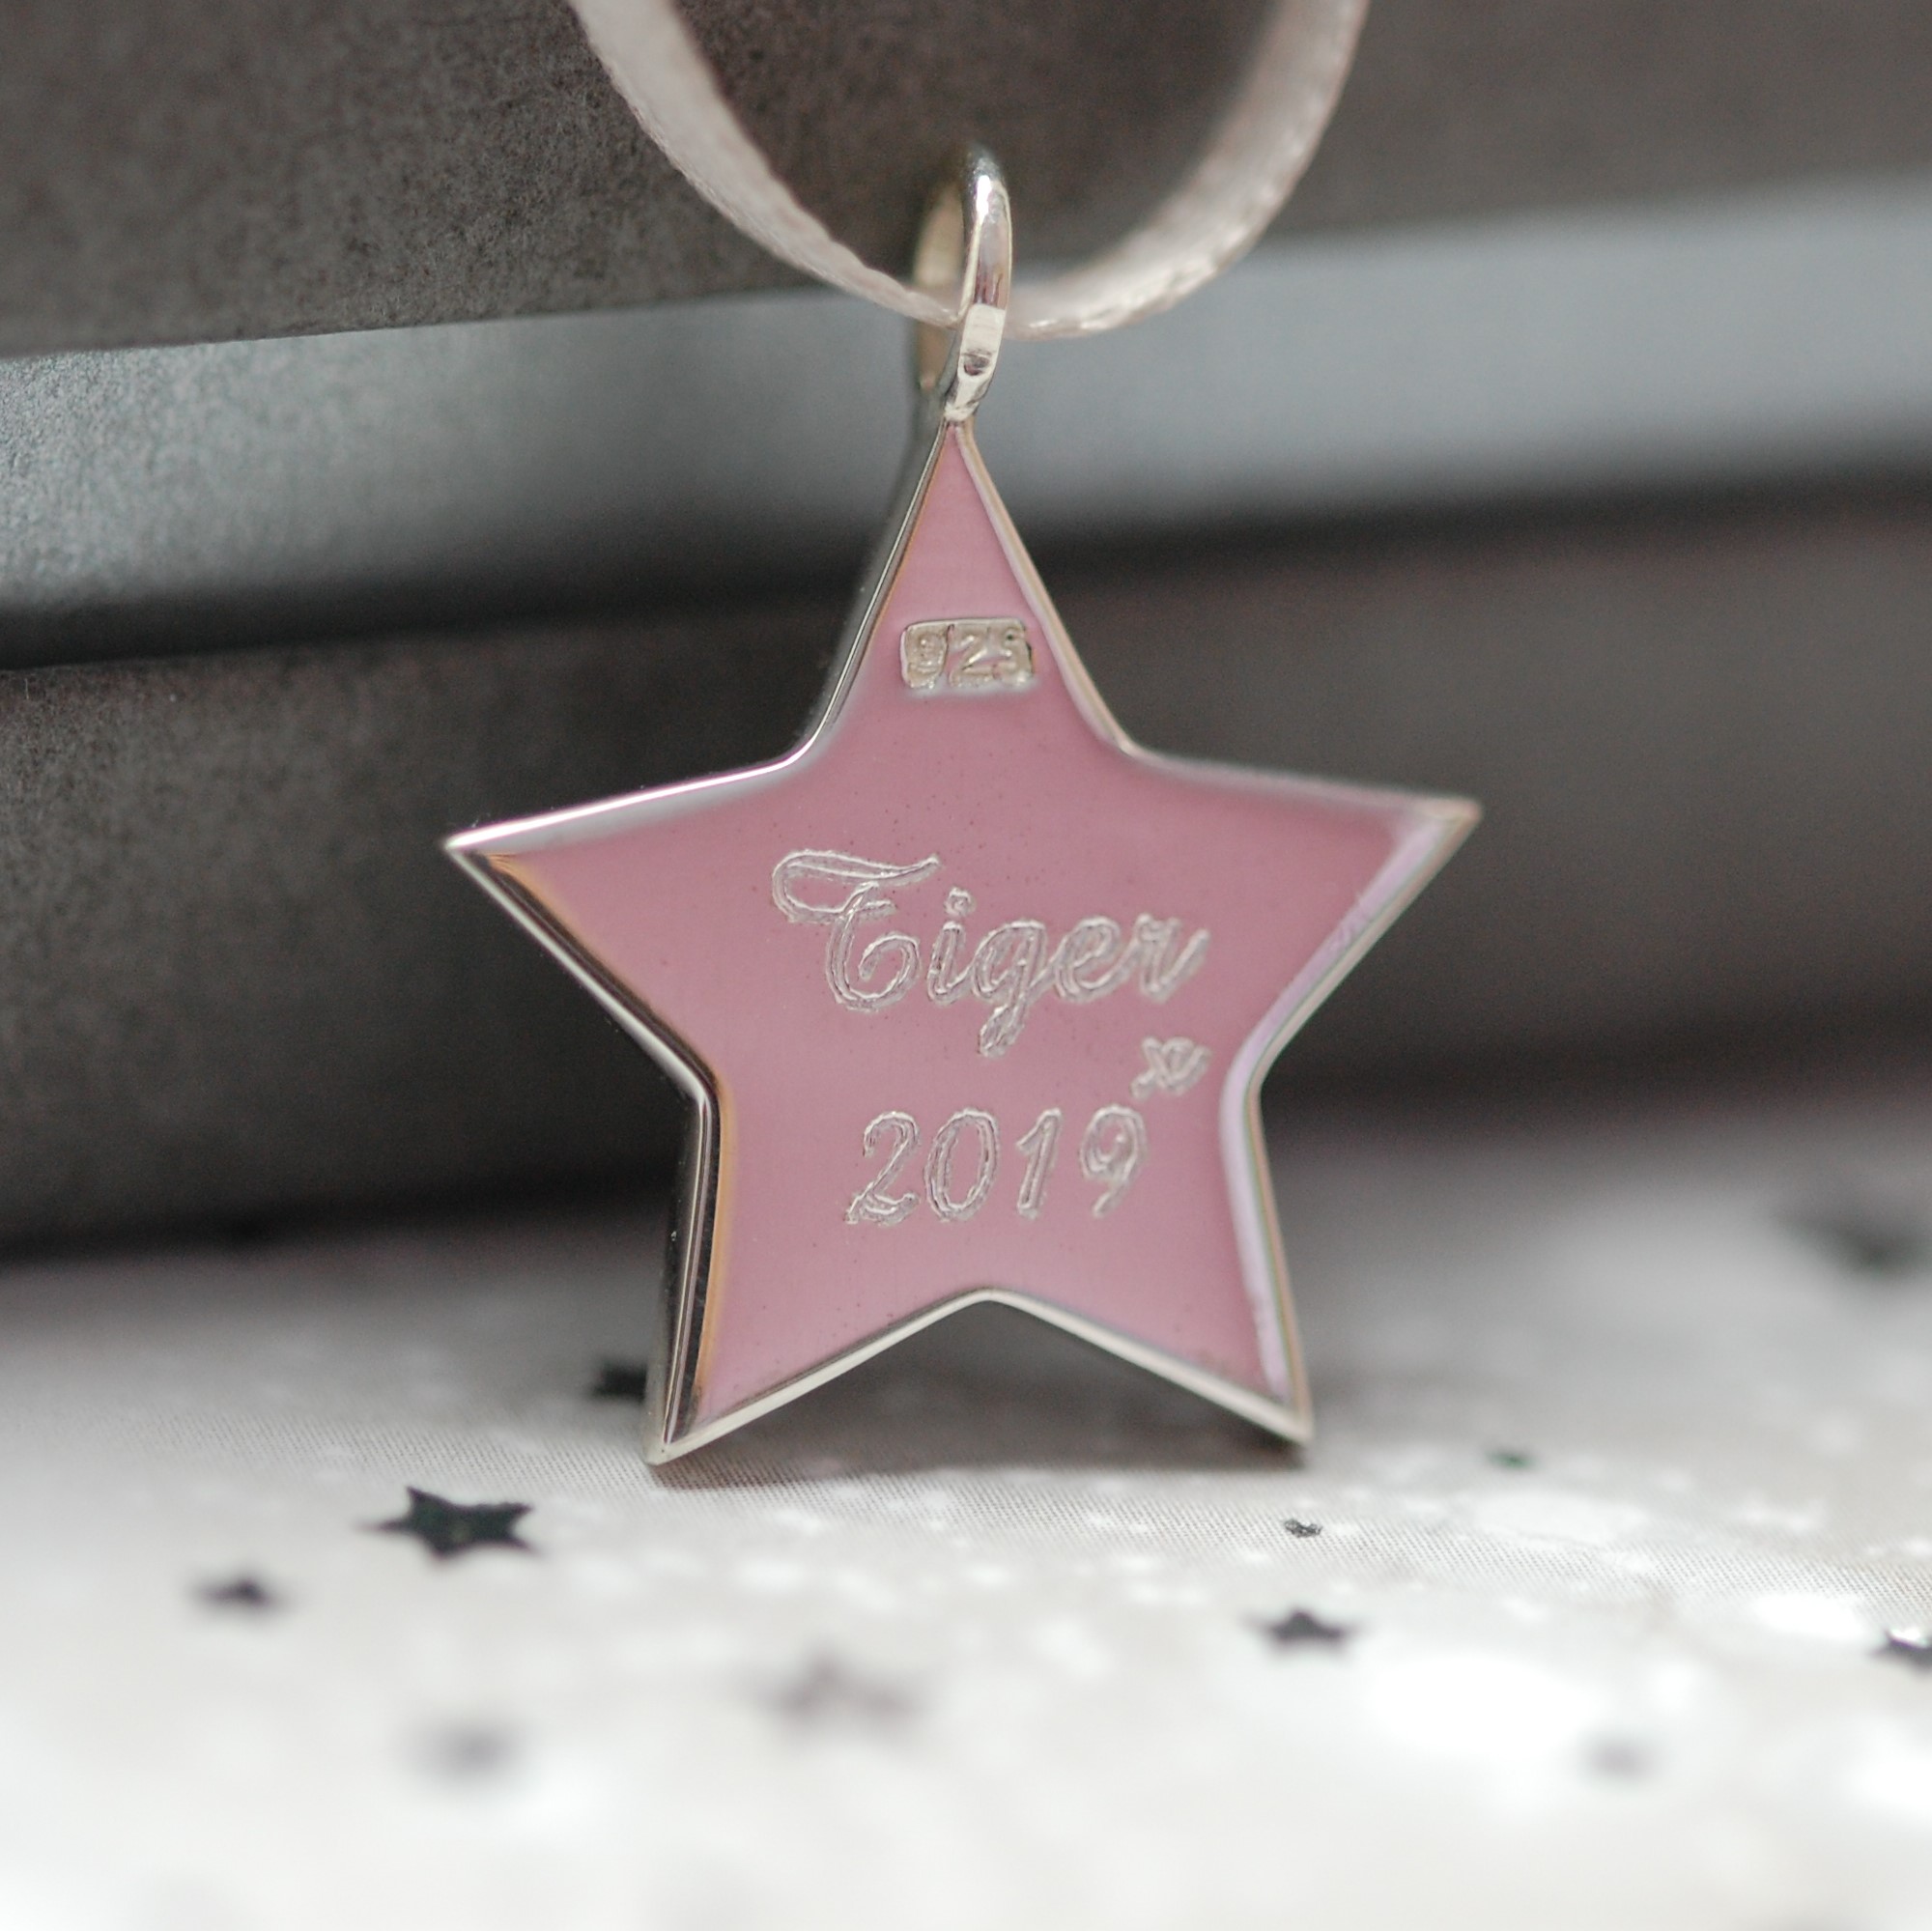 Pet name engraved on the back of sterling silver star with pet cremation ashes